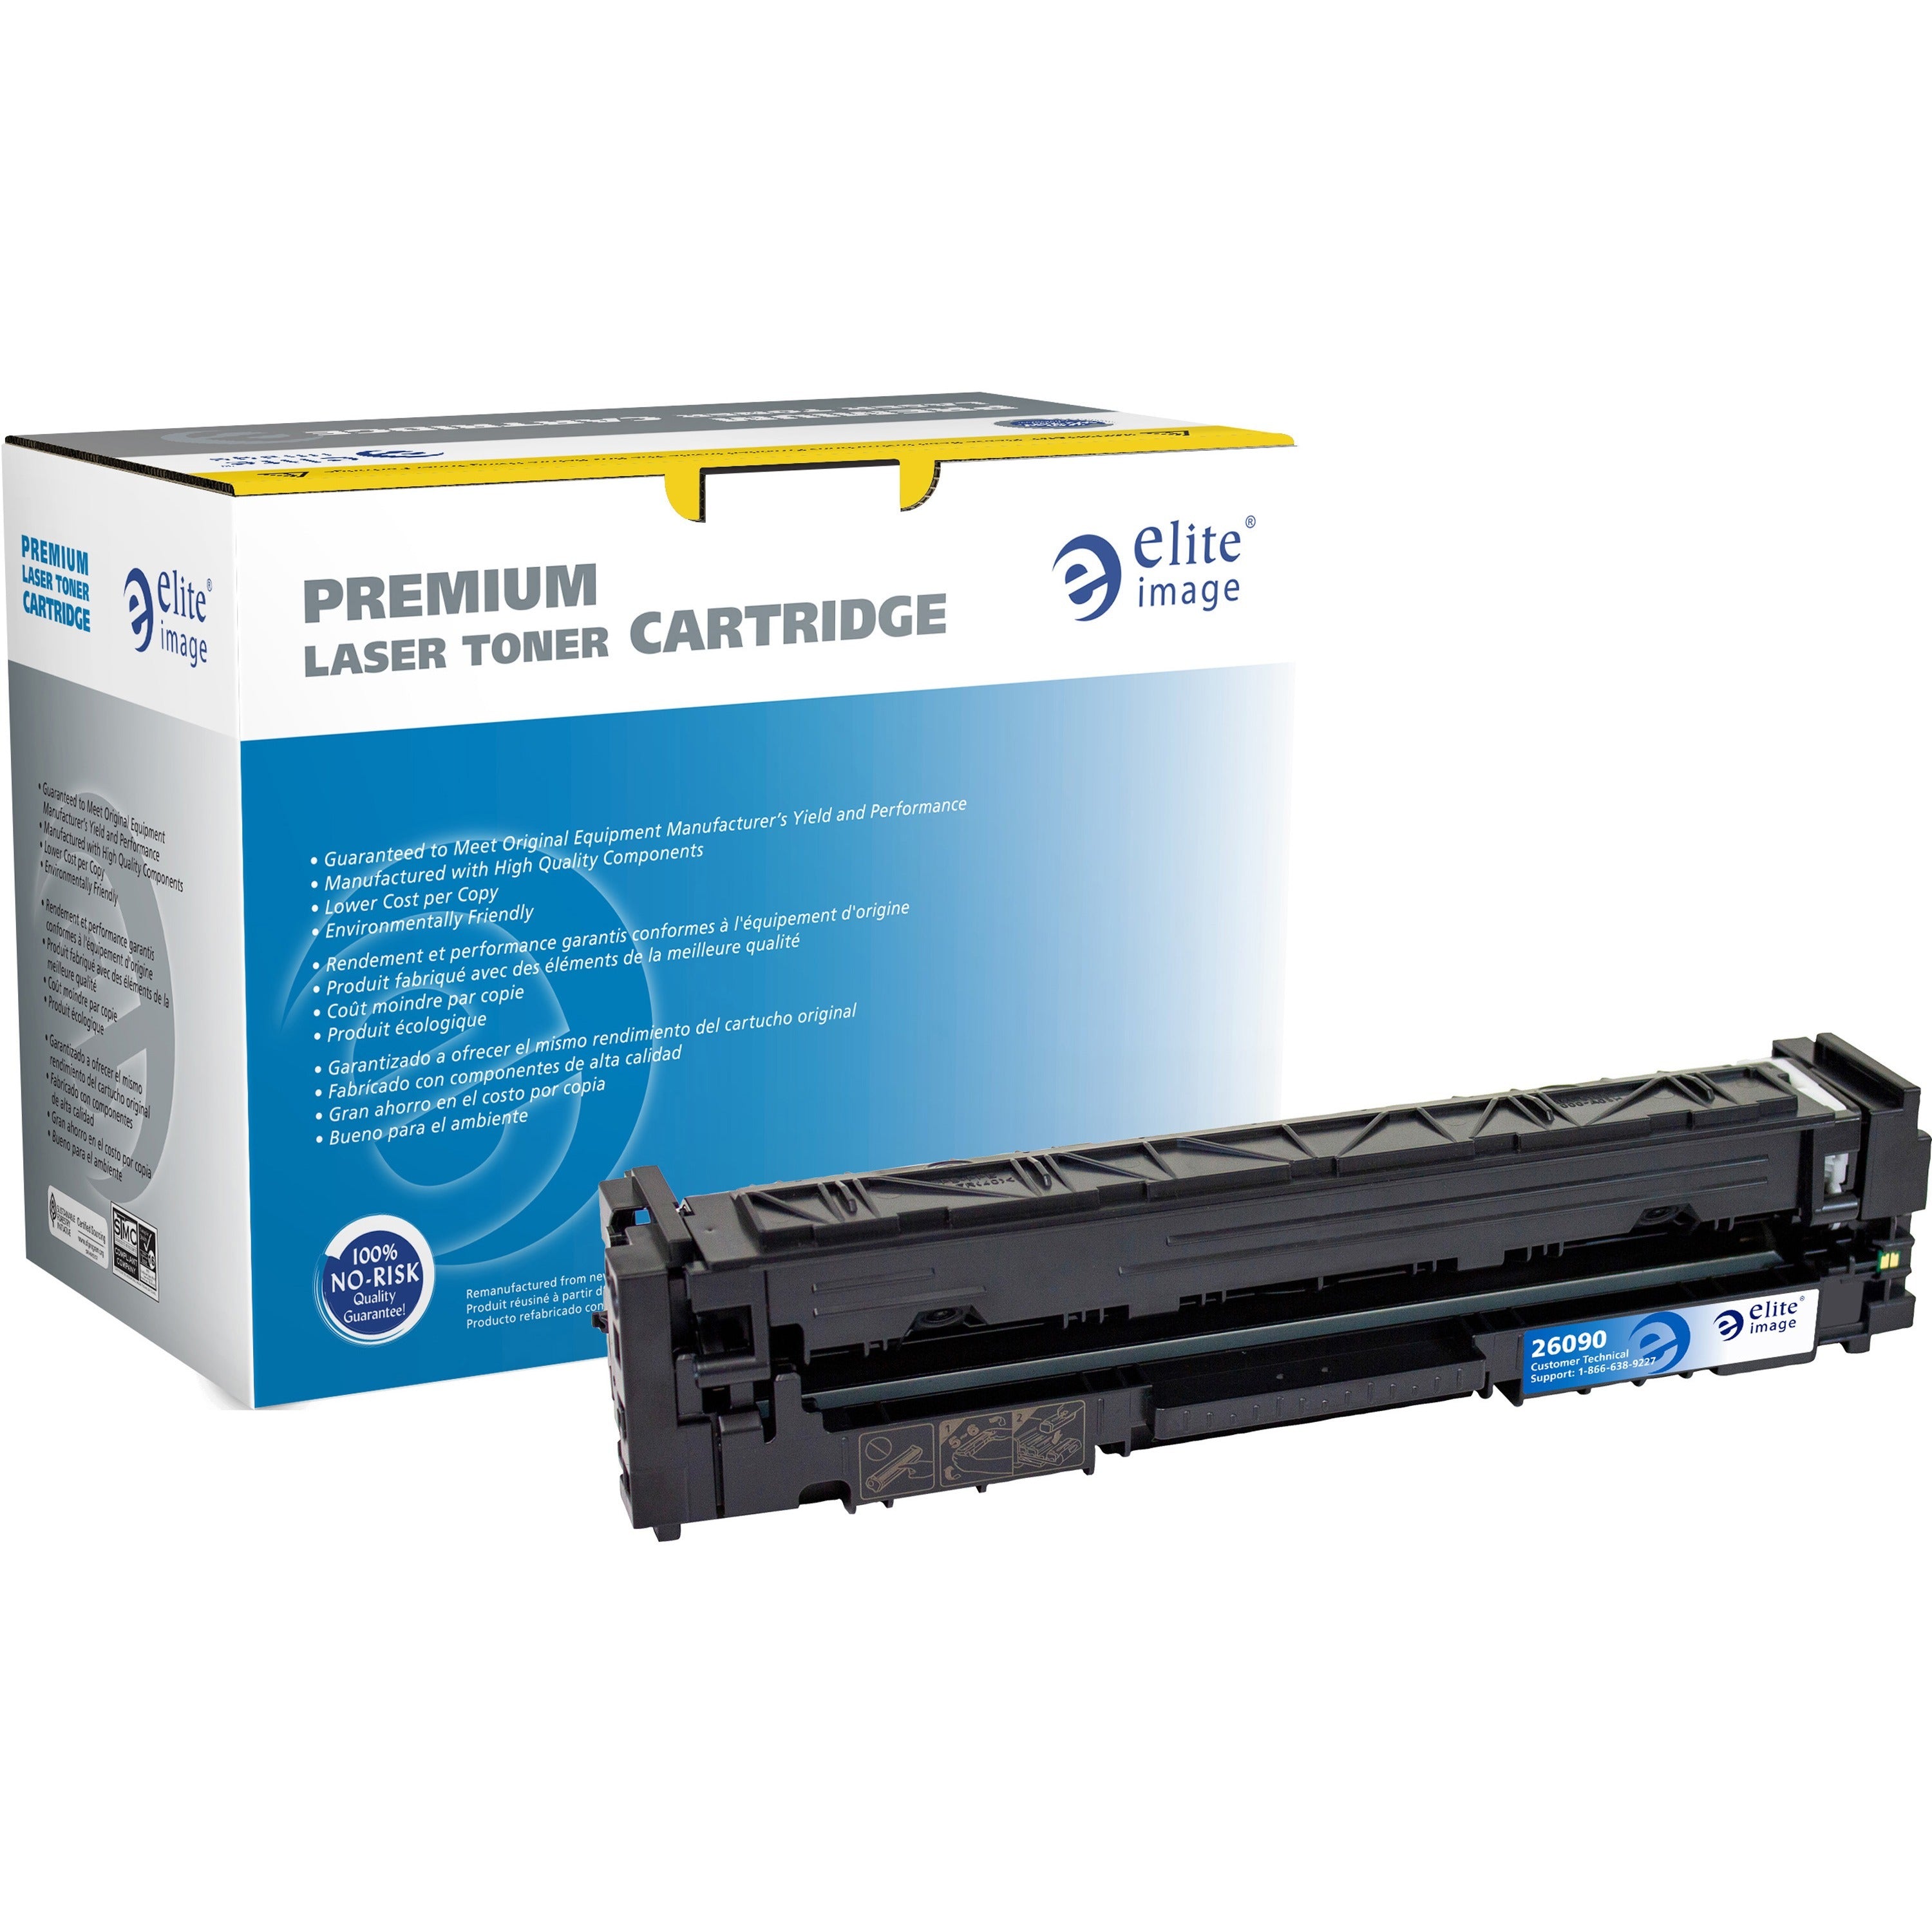 elite-image-remanufactured-laser-toner-cartridge-alternative-for-hp-202a-cf502a-yellow-1-each-1300-pages_eli26090 - 1